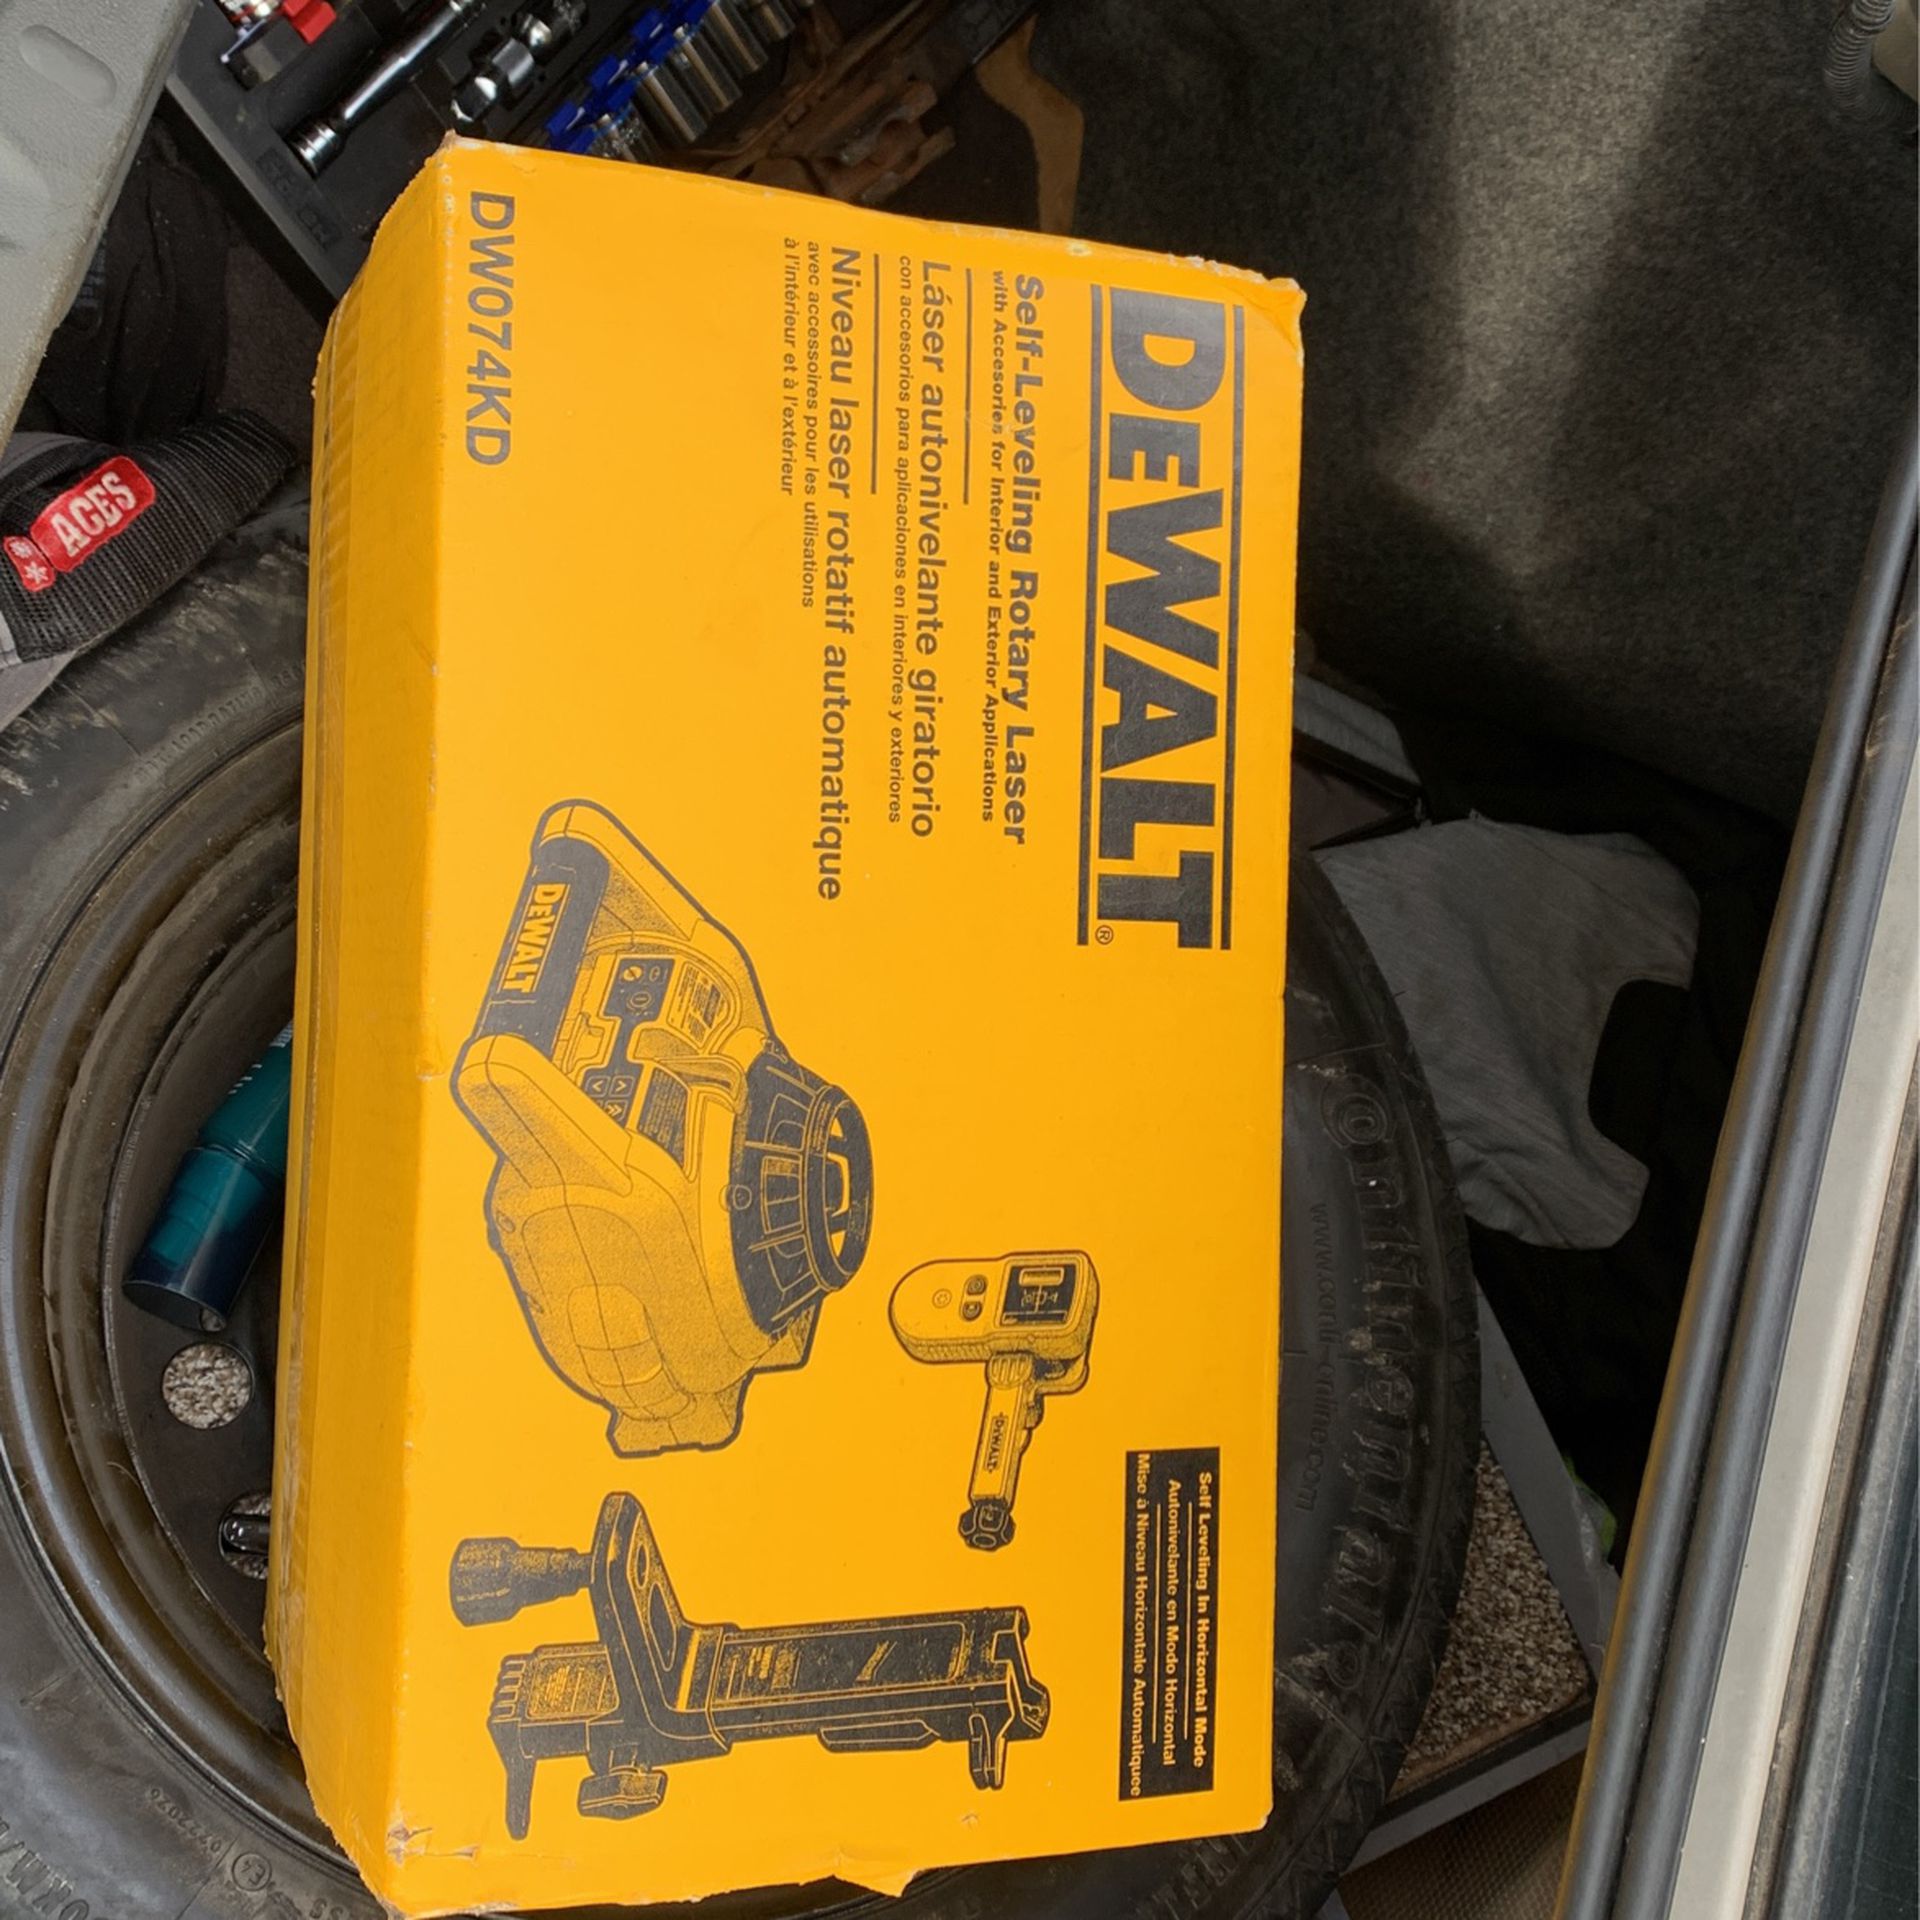 Self leveling rotary laser brand new in a box